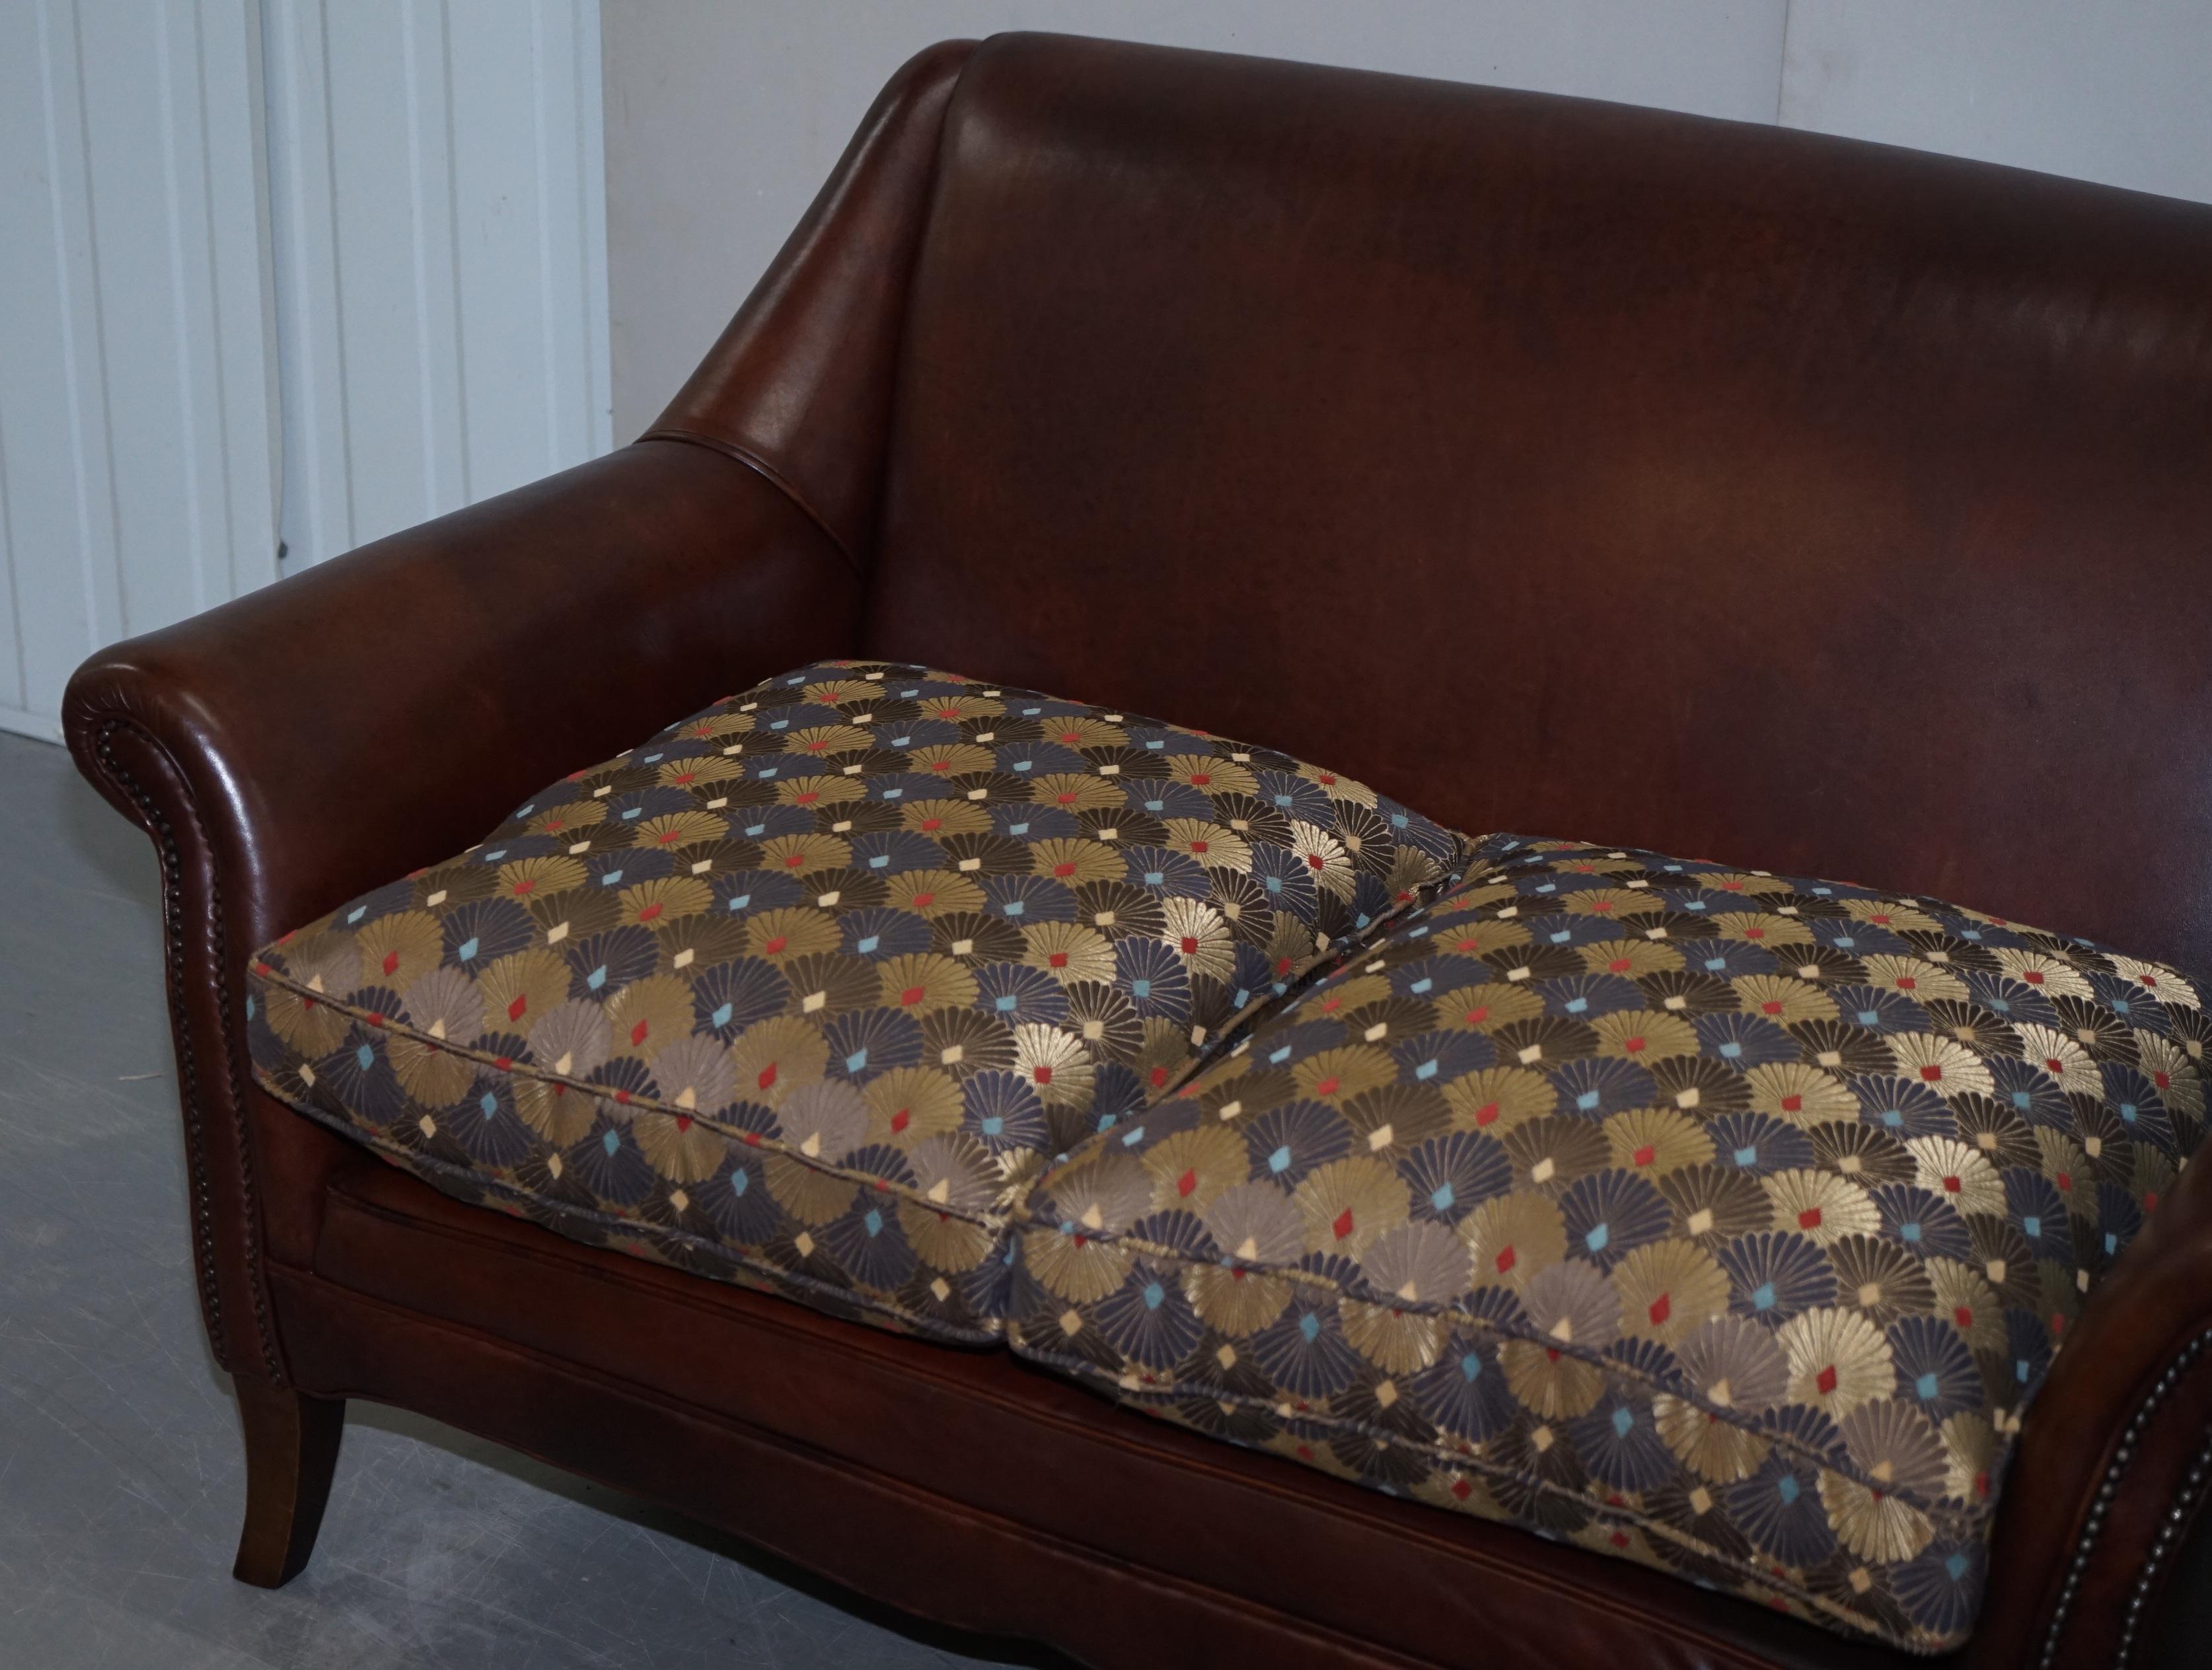 Art Deco Vintage Aged Brown Leather Sofa with Liberty's of London Upholstered Cushions